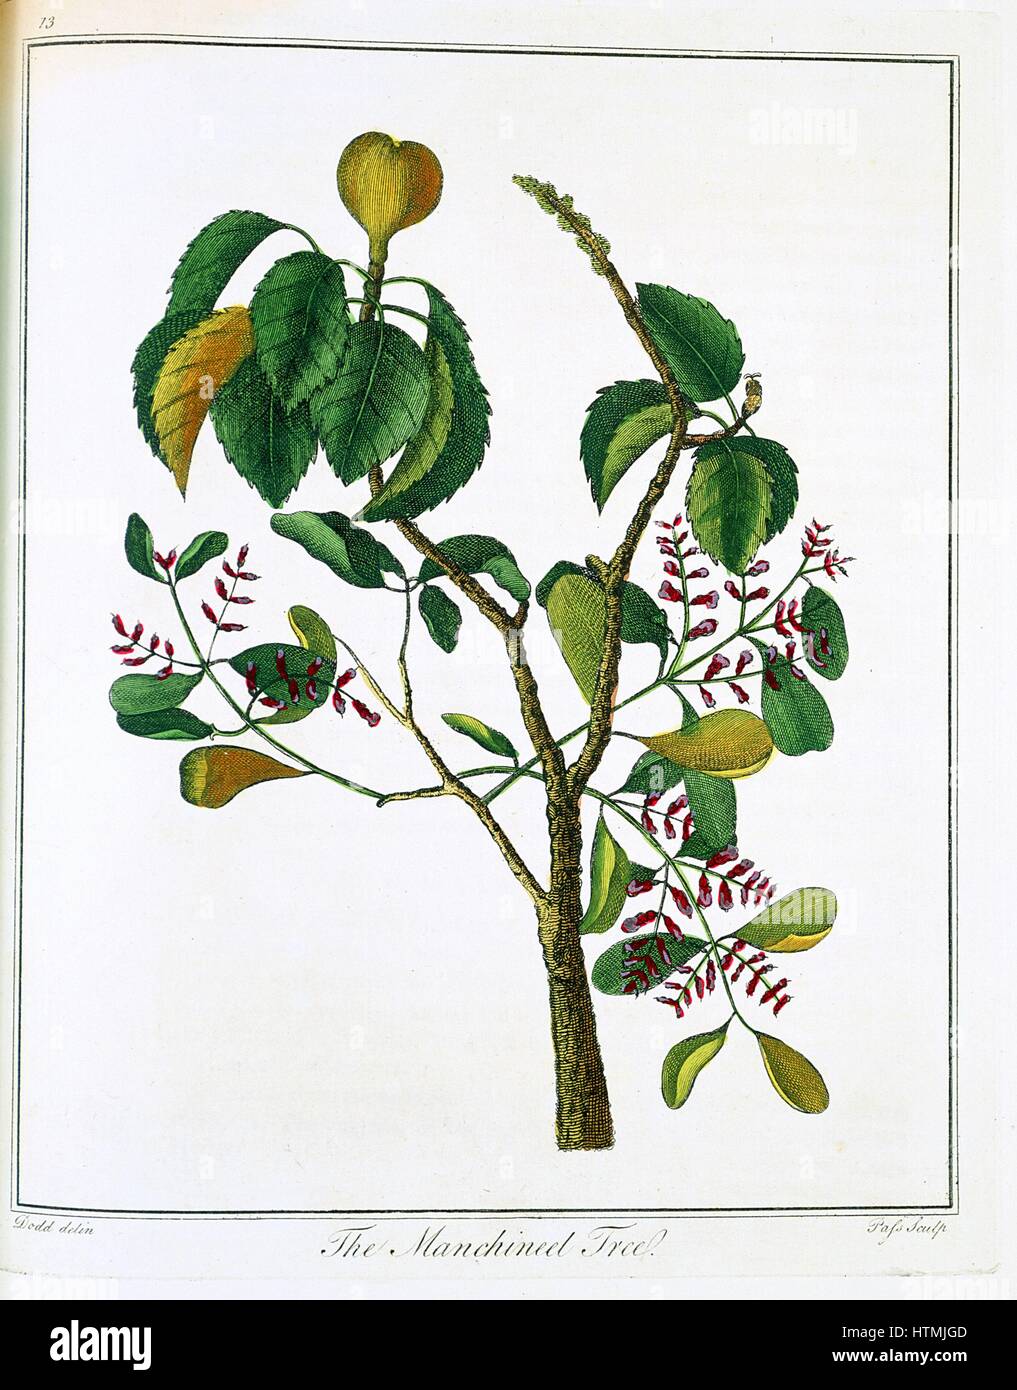 Manicheel tree (Hippomane mancinella) or Poison Guava: Caribbean and Gulf of Mexico. Very poisonous fruits, but inviting, killed Conquistadors. Carib Indians used sap to poison arrows. Engraving c.1795 Stock Photo